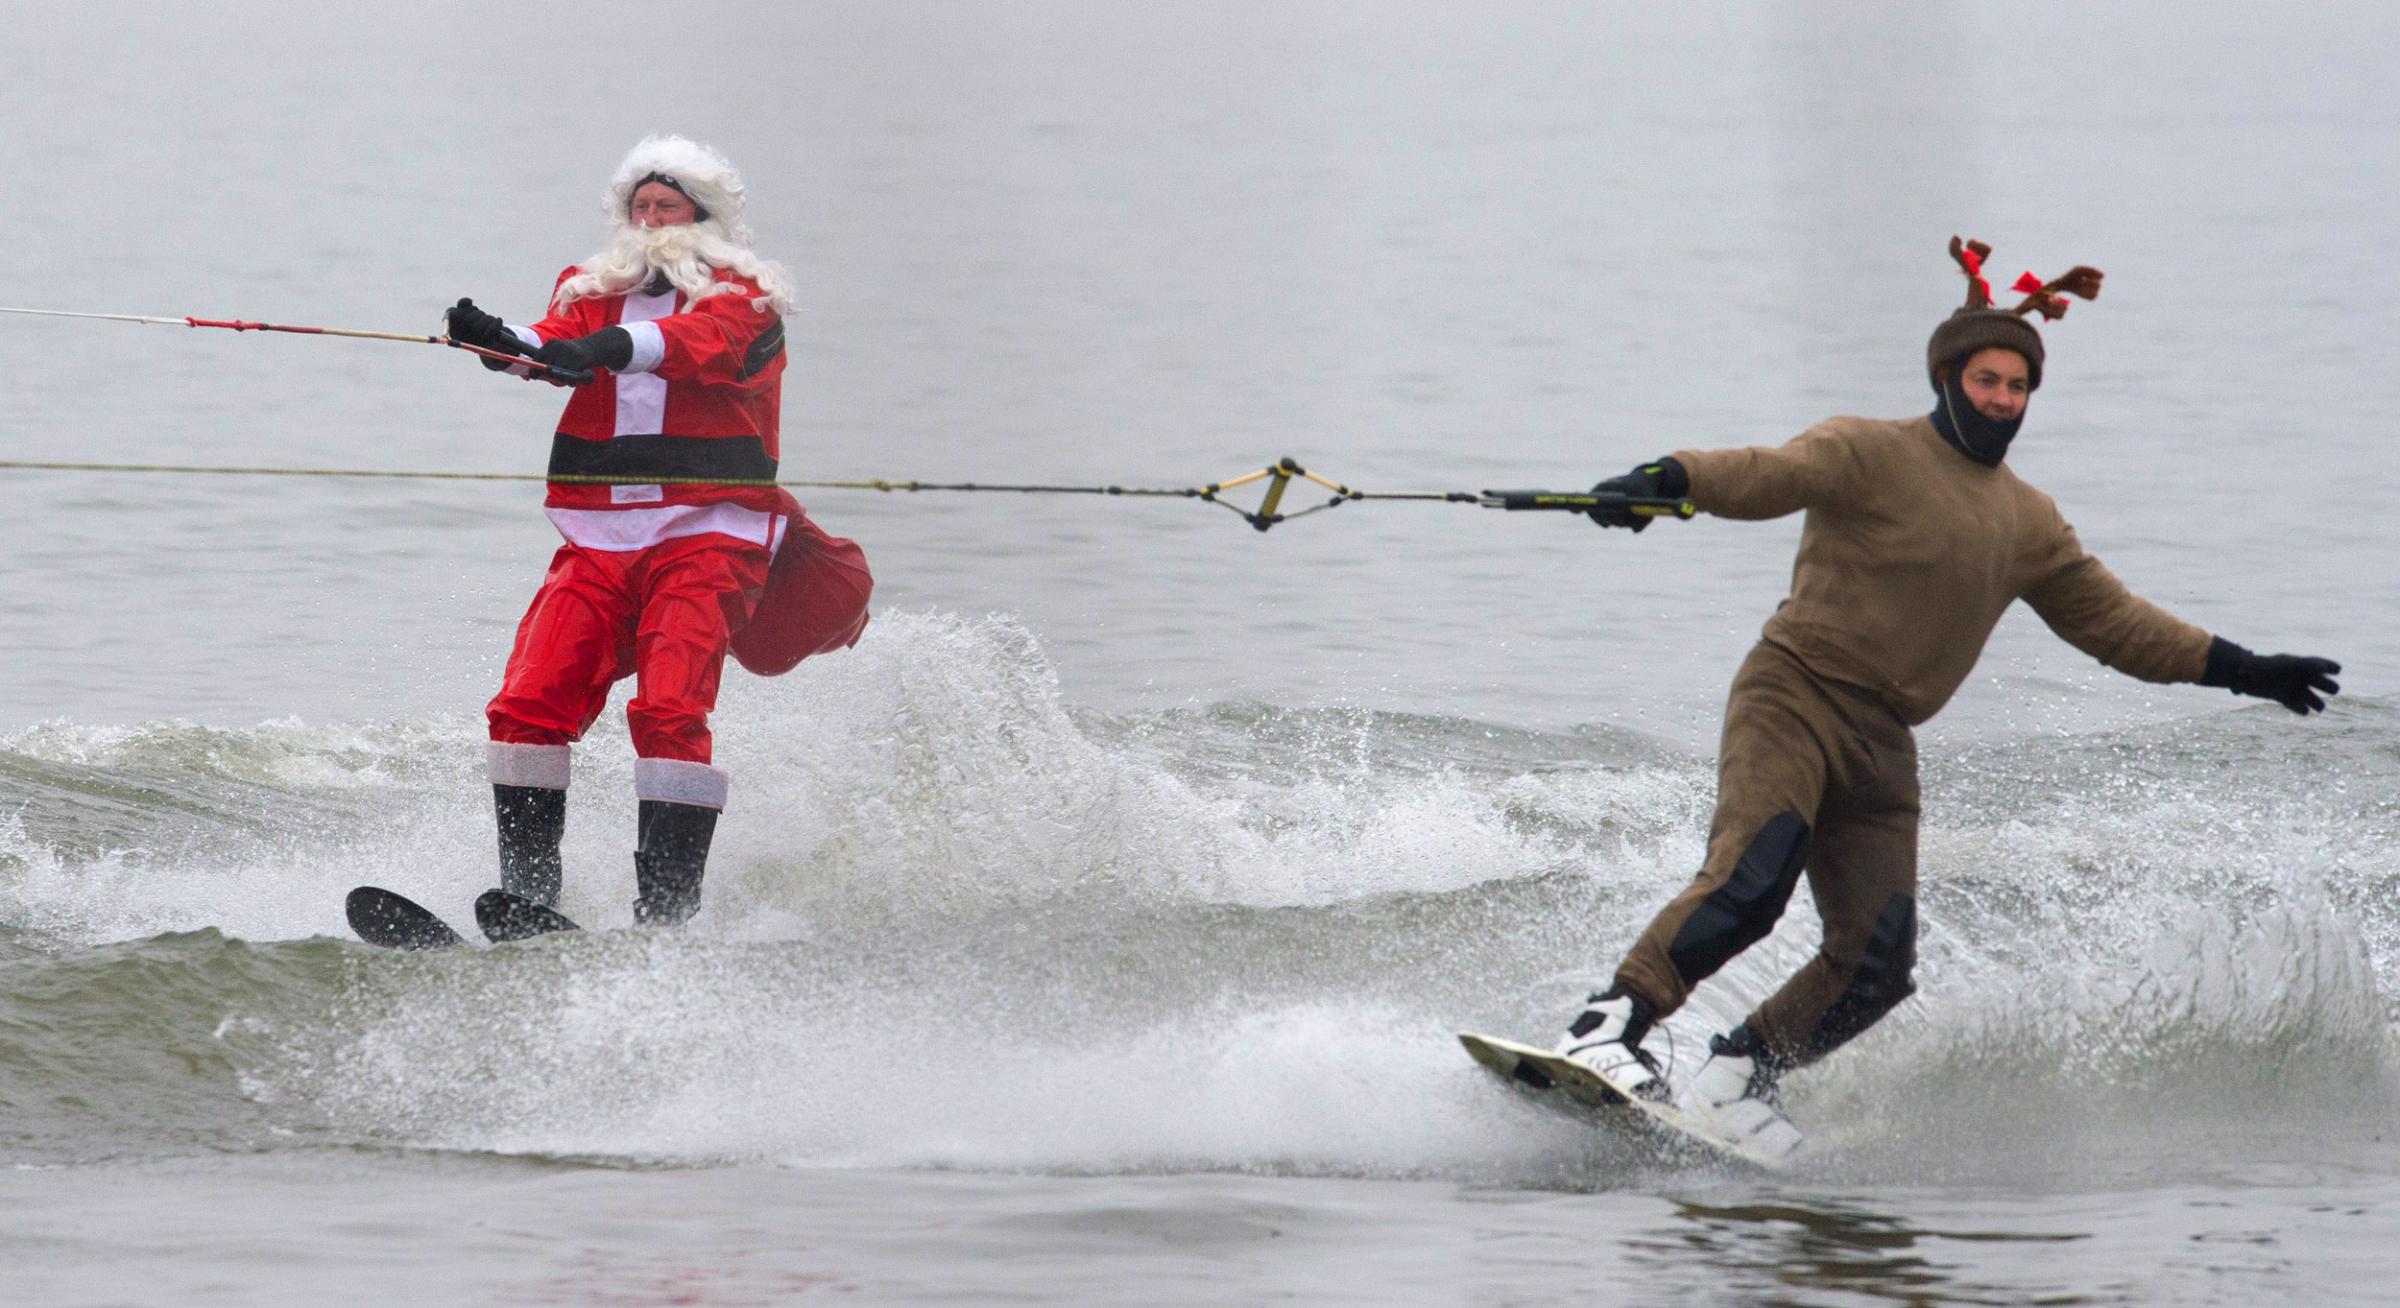 The water-skiing Santa and a Reindeer are seen along the Potomac River off Old Town Alexandria, Virginia, not far from Washington, DC on Dec. 24, 2014 during the annual water-skiing Santa event.